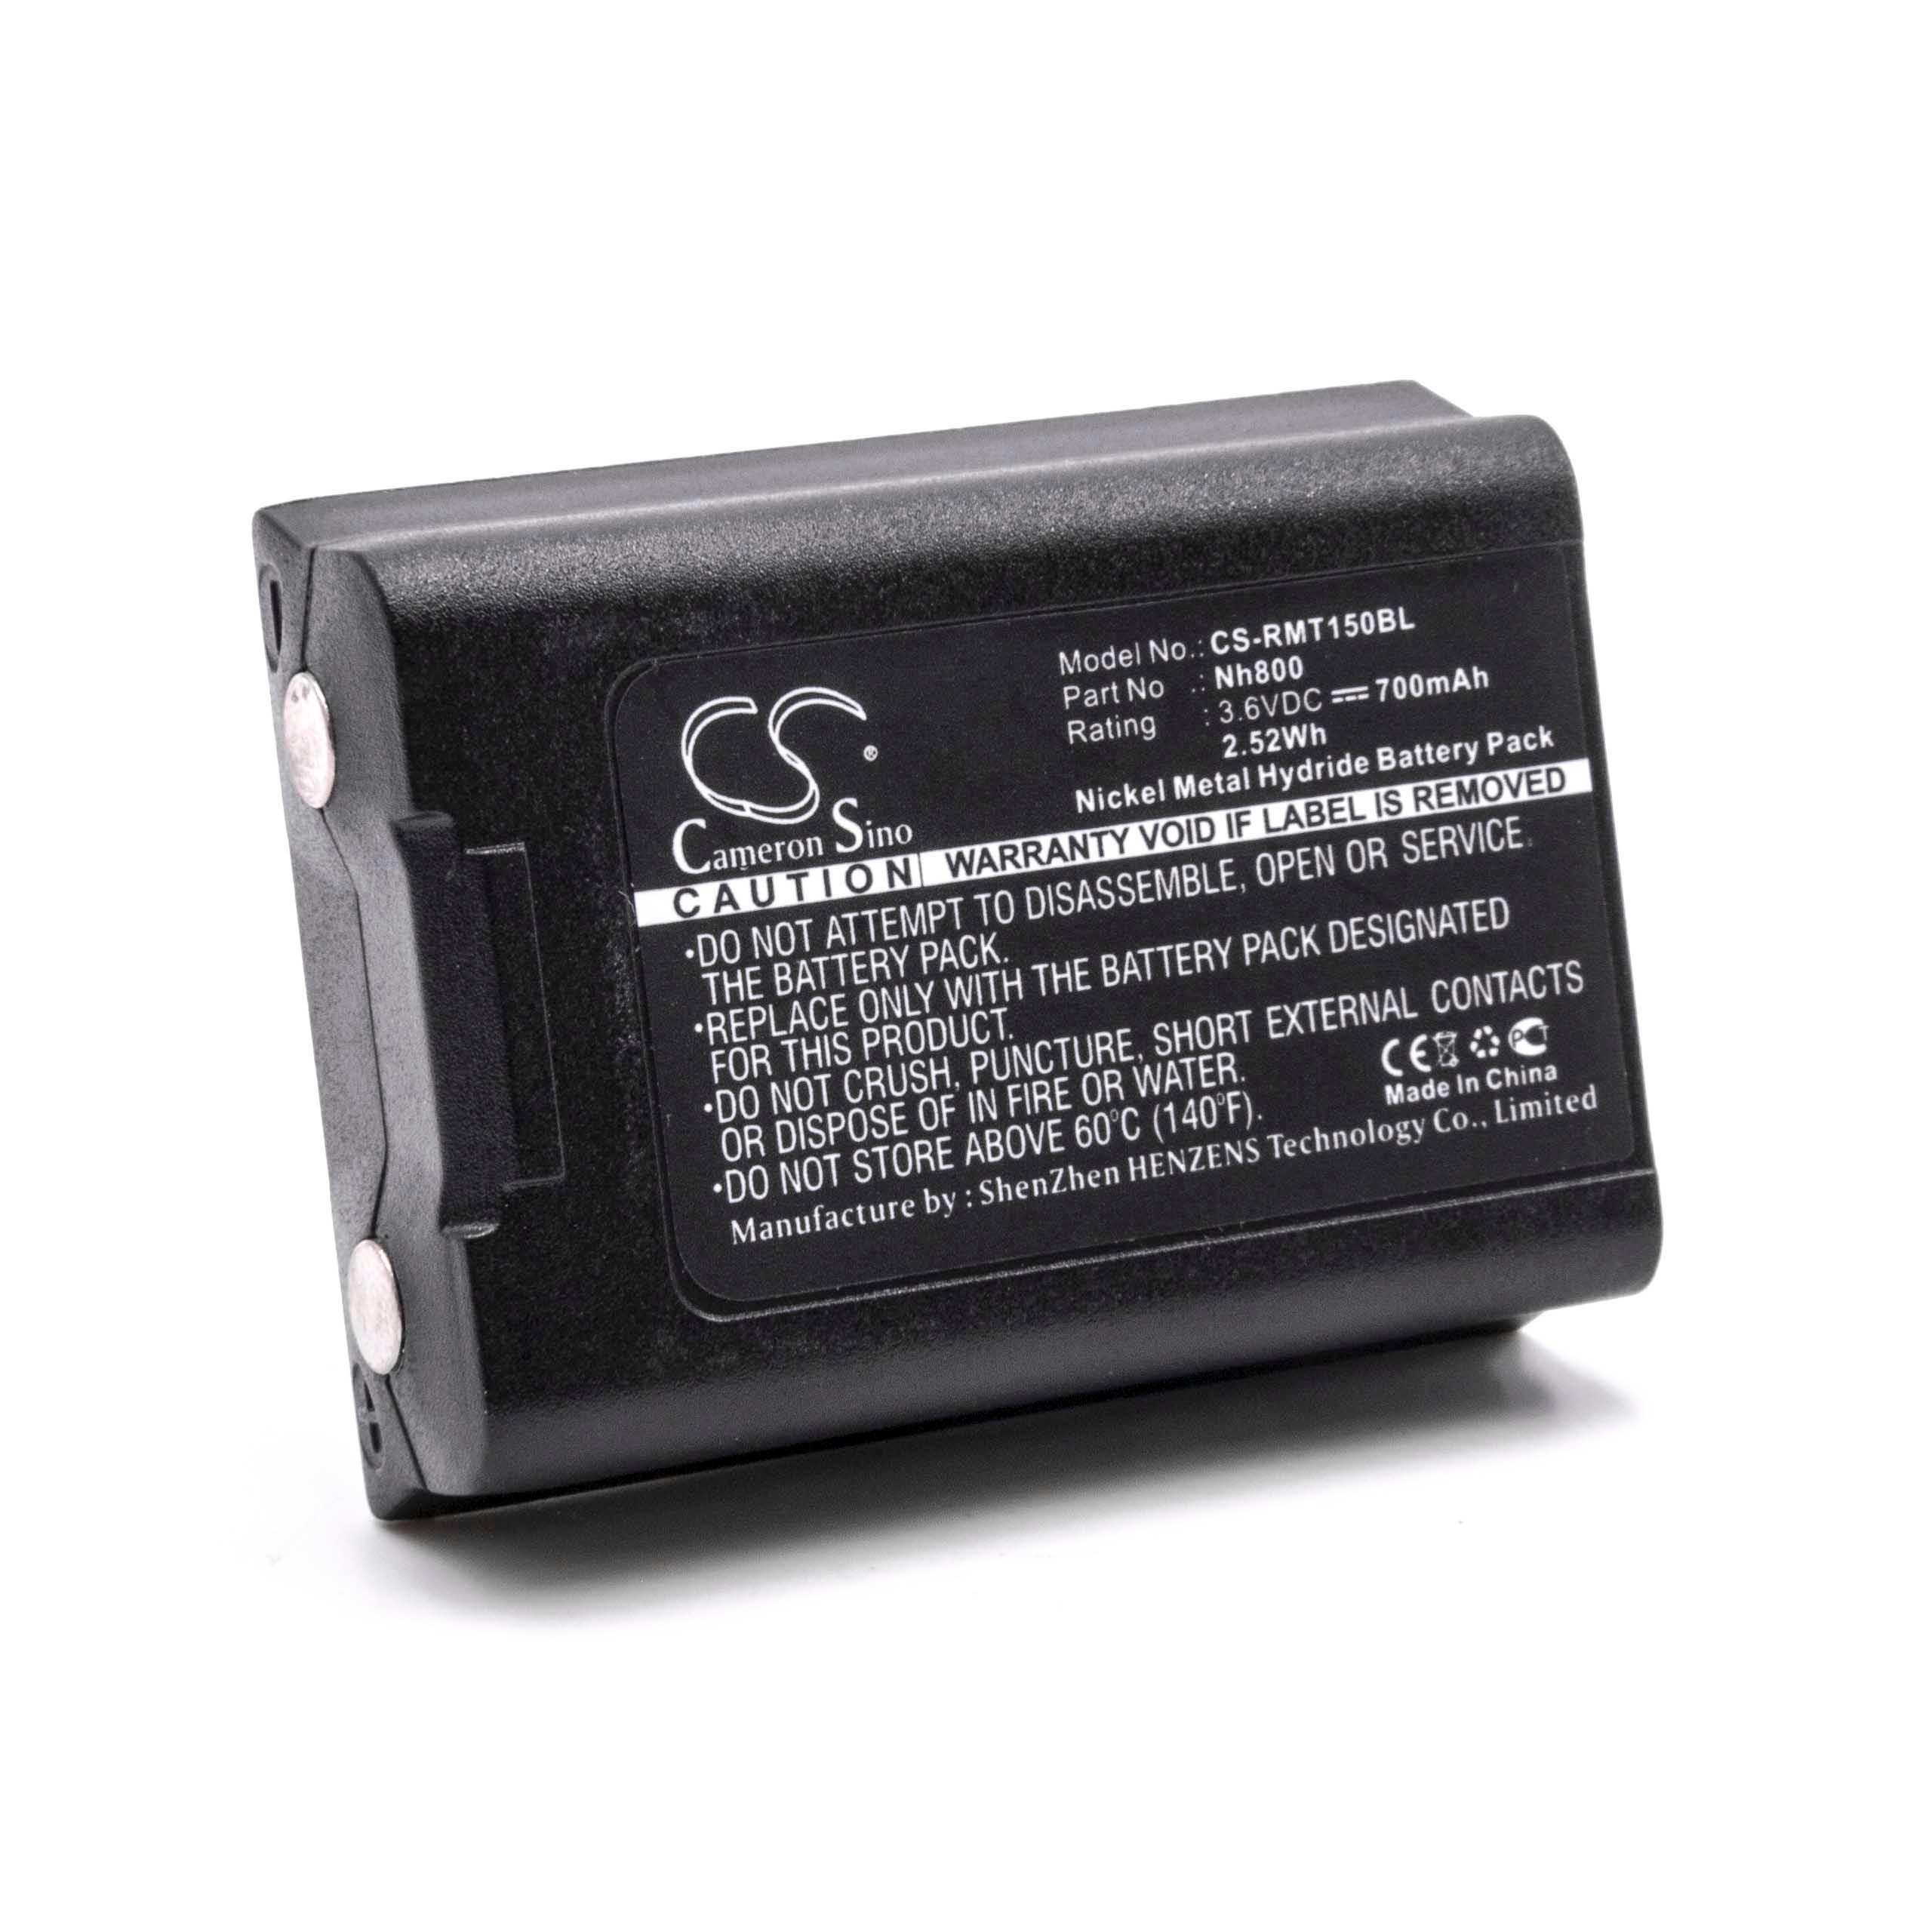 Remote Control Battery Replacement for Ravioli NH800 - 700mAh 3.6V NiMH